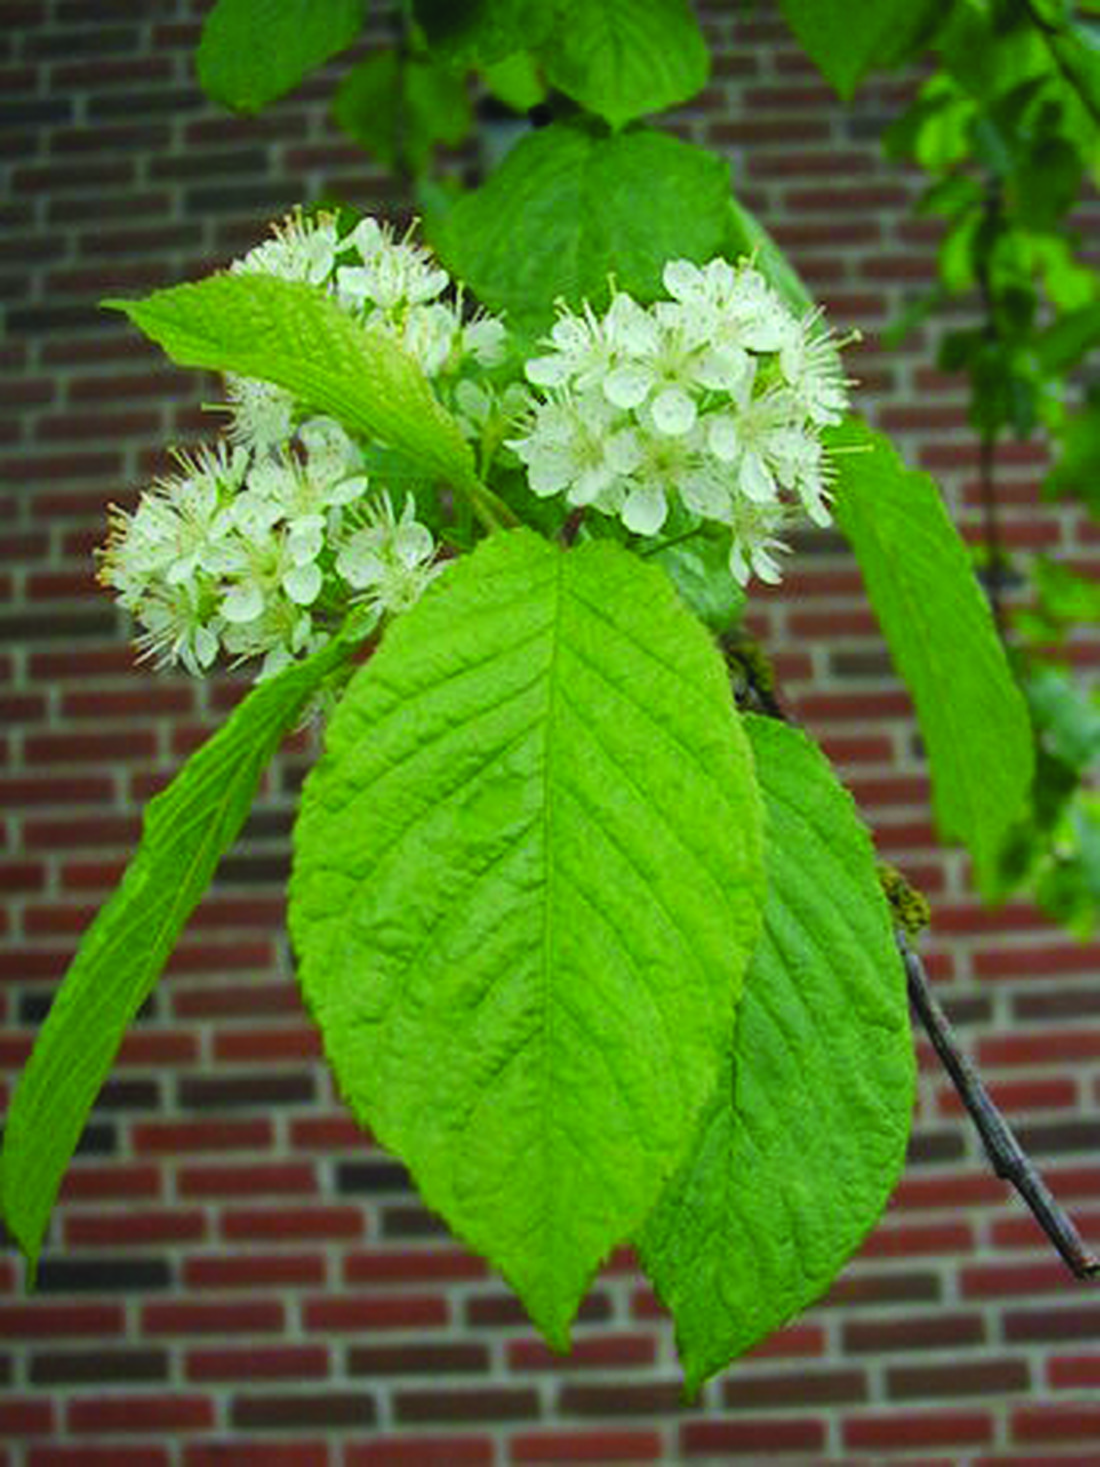 image of amur chokecherry leaves and flowers